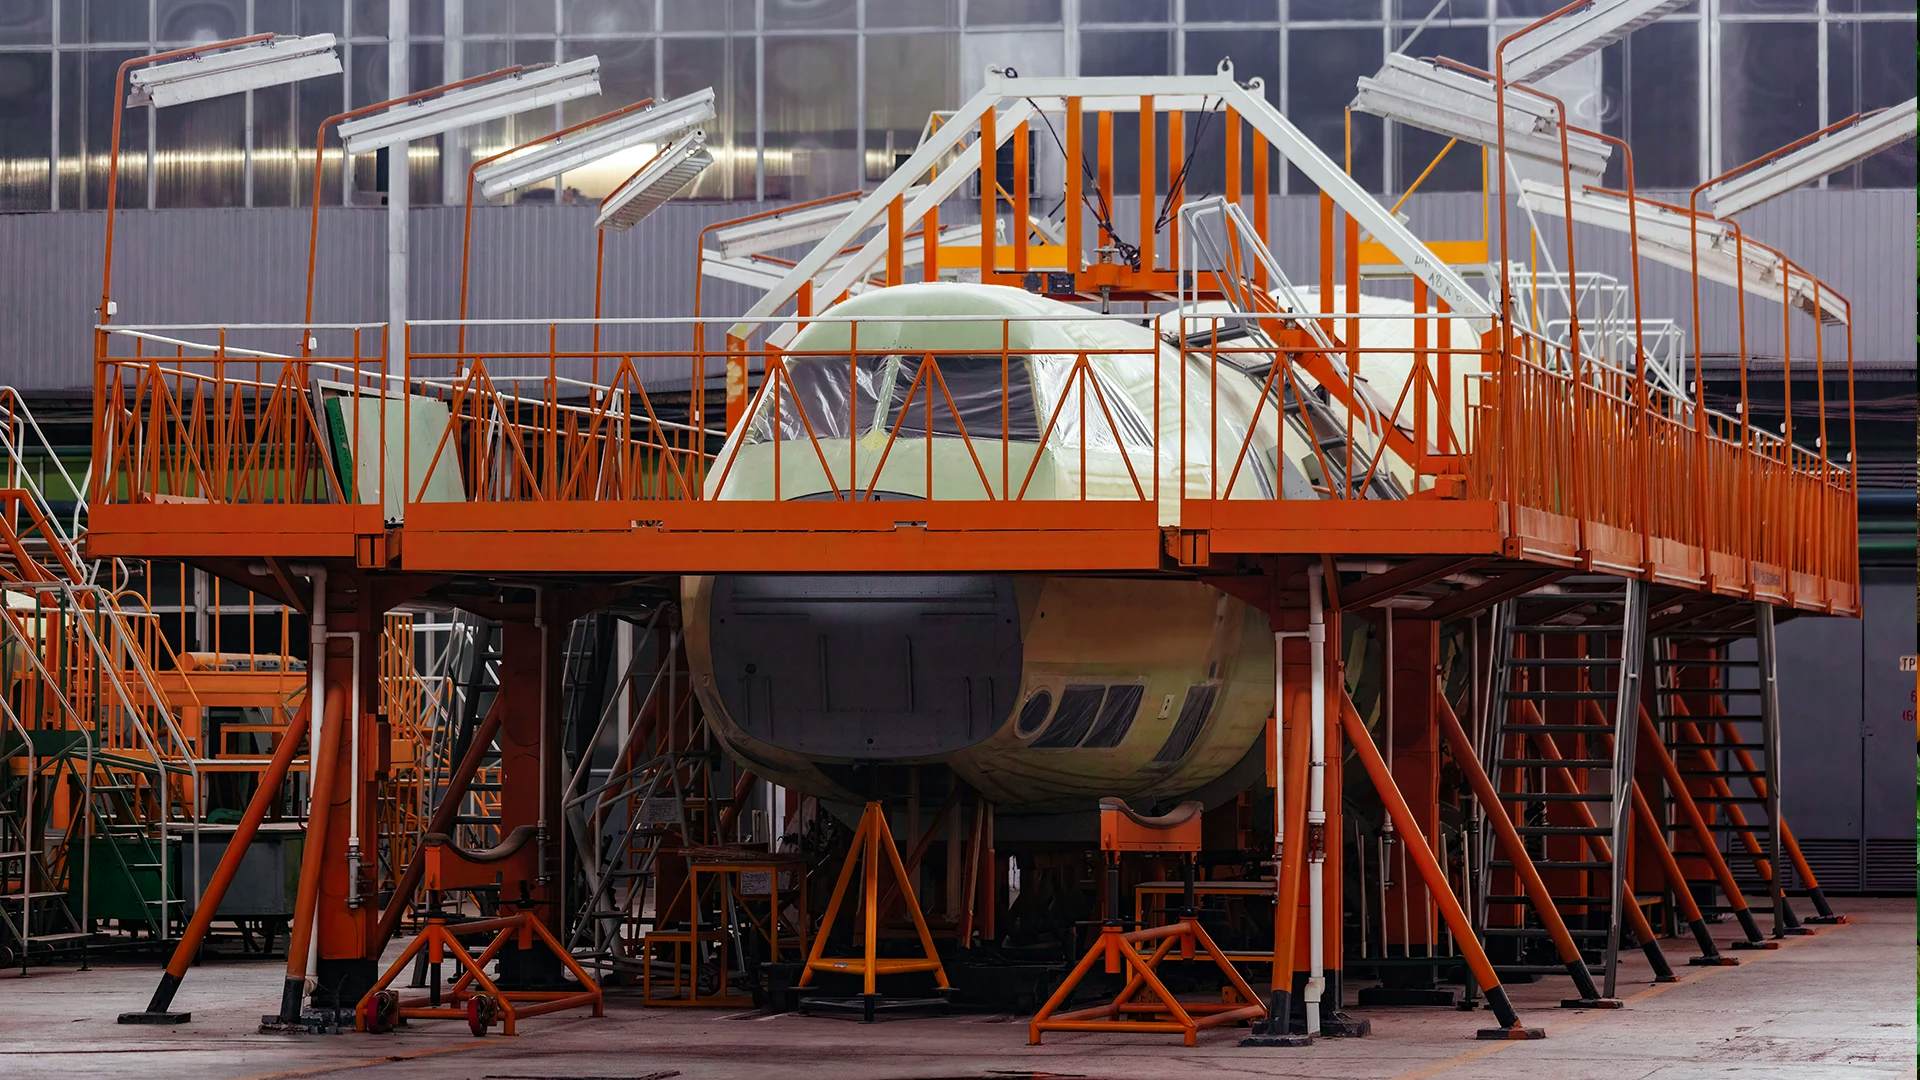 An aircraft under construction surrounded by scaffolding and support structures inside an industrial hangar.